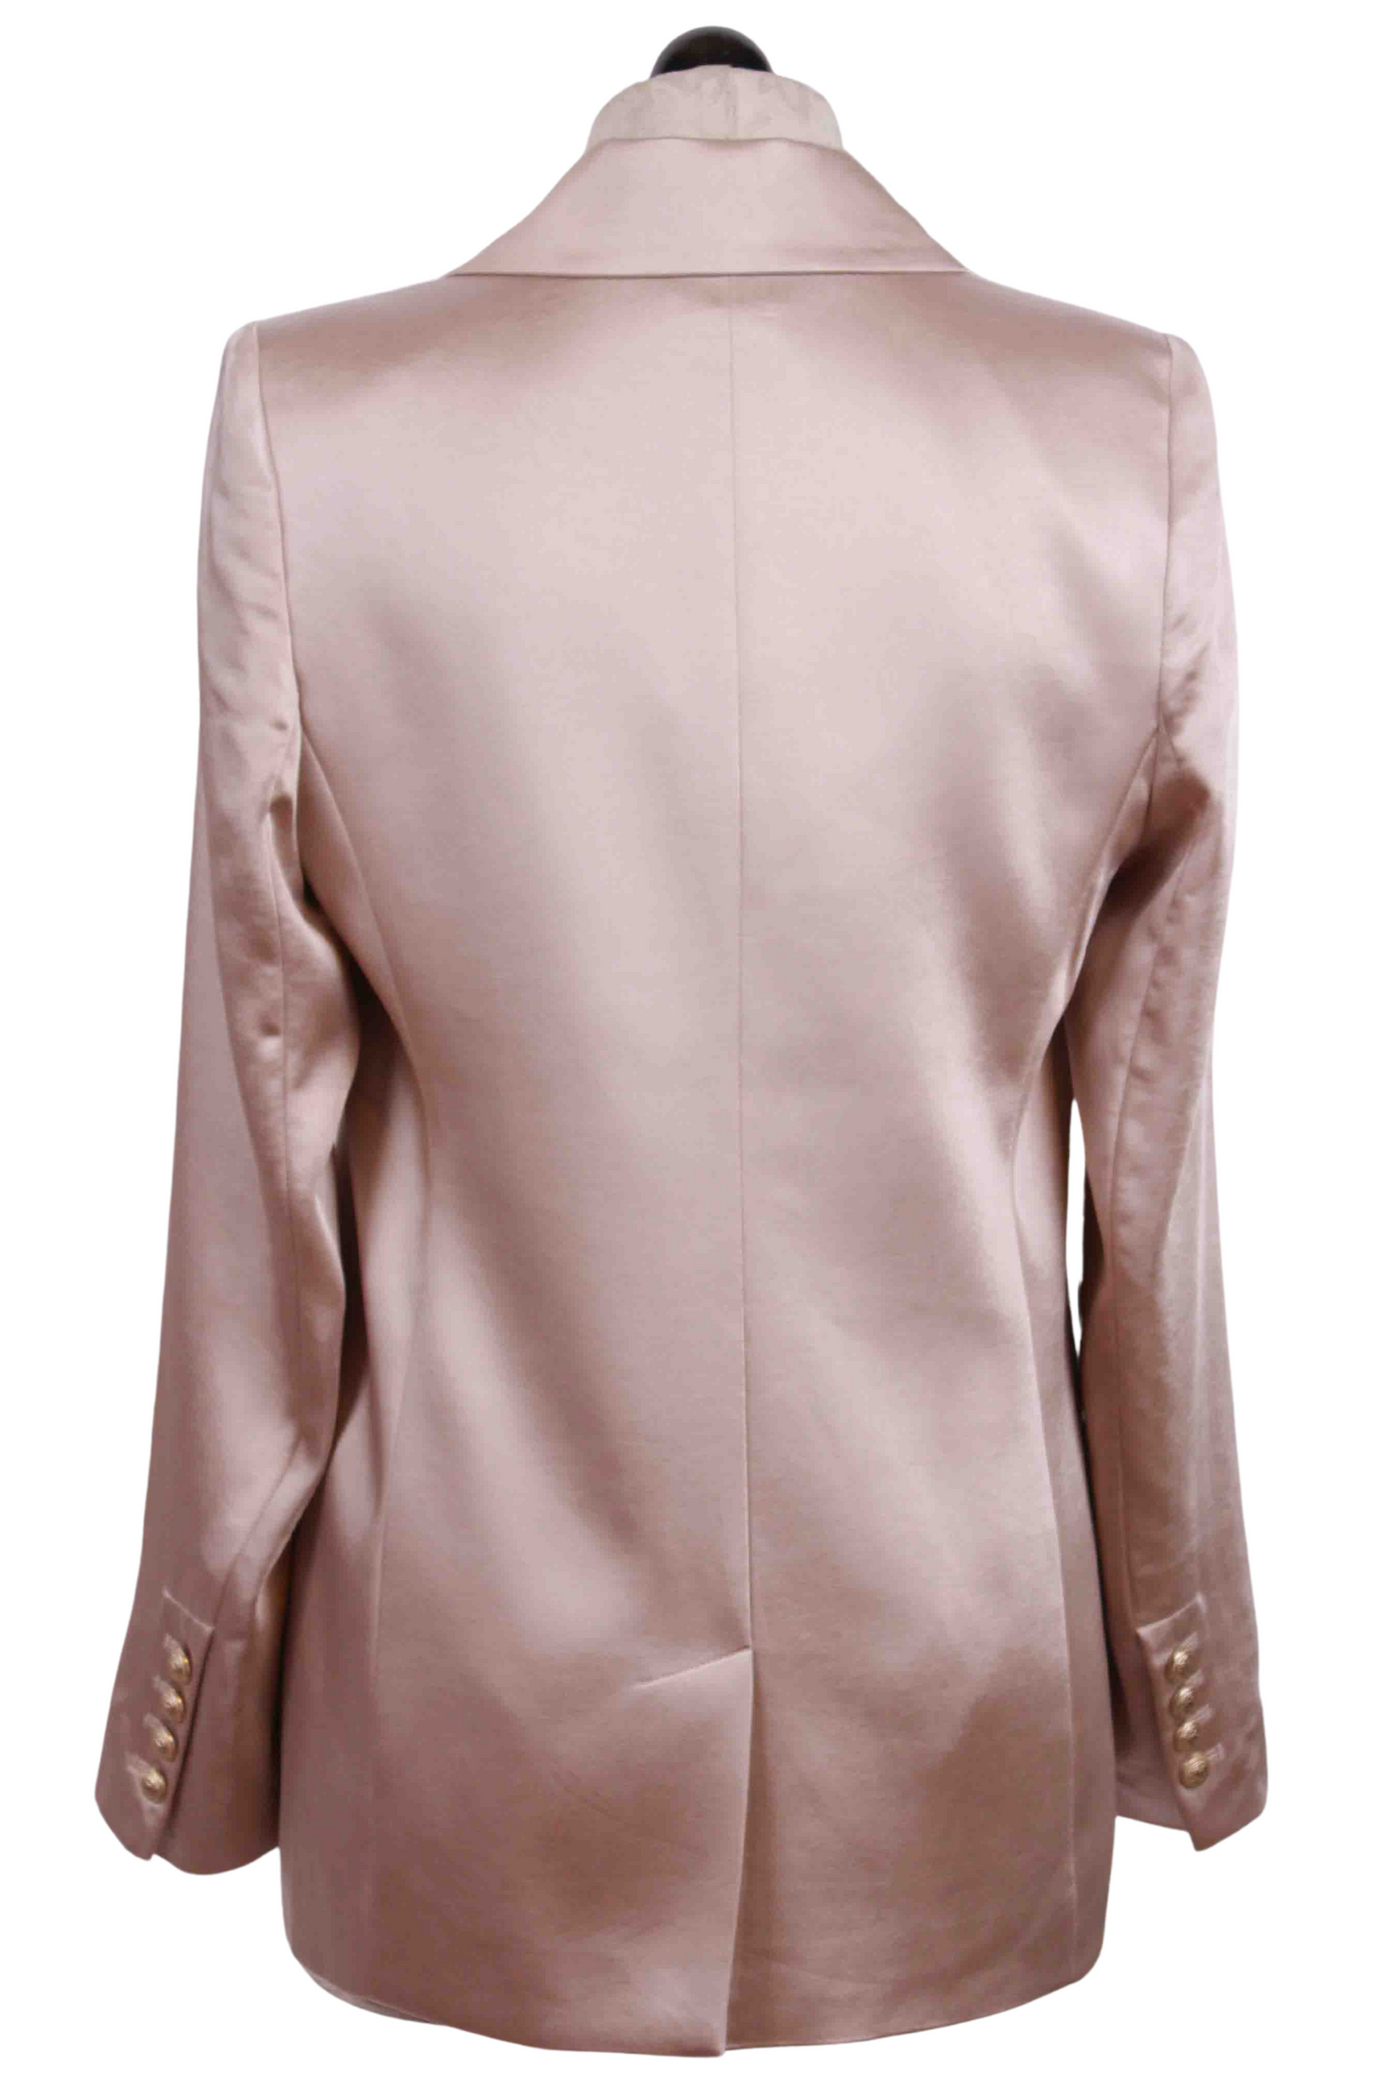 back view of Champagne Leighton Satin Blazer by Generation Love